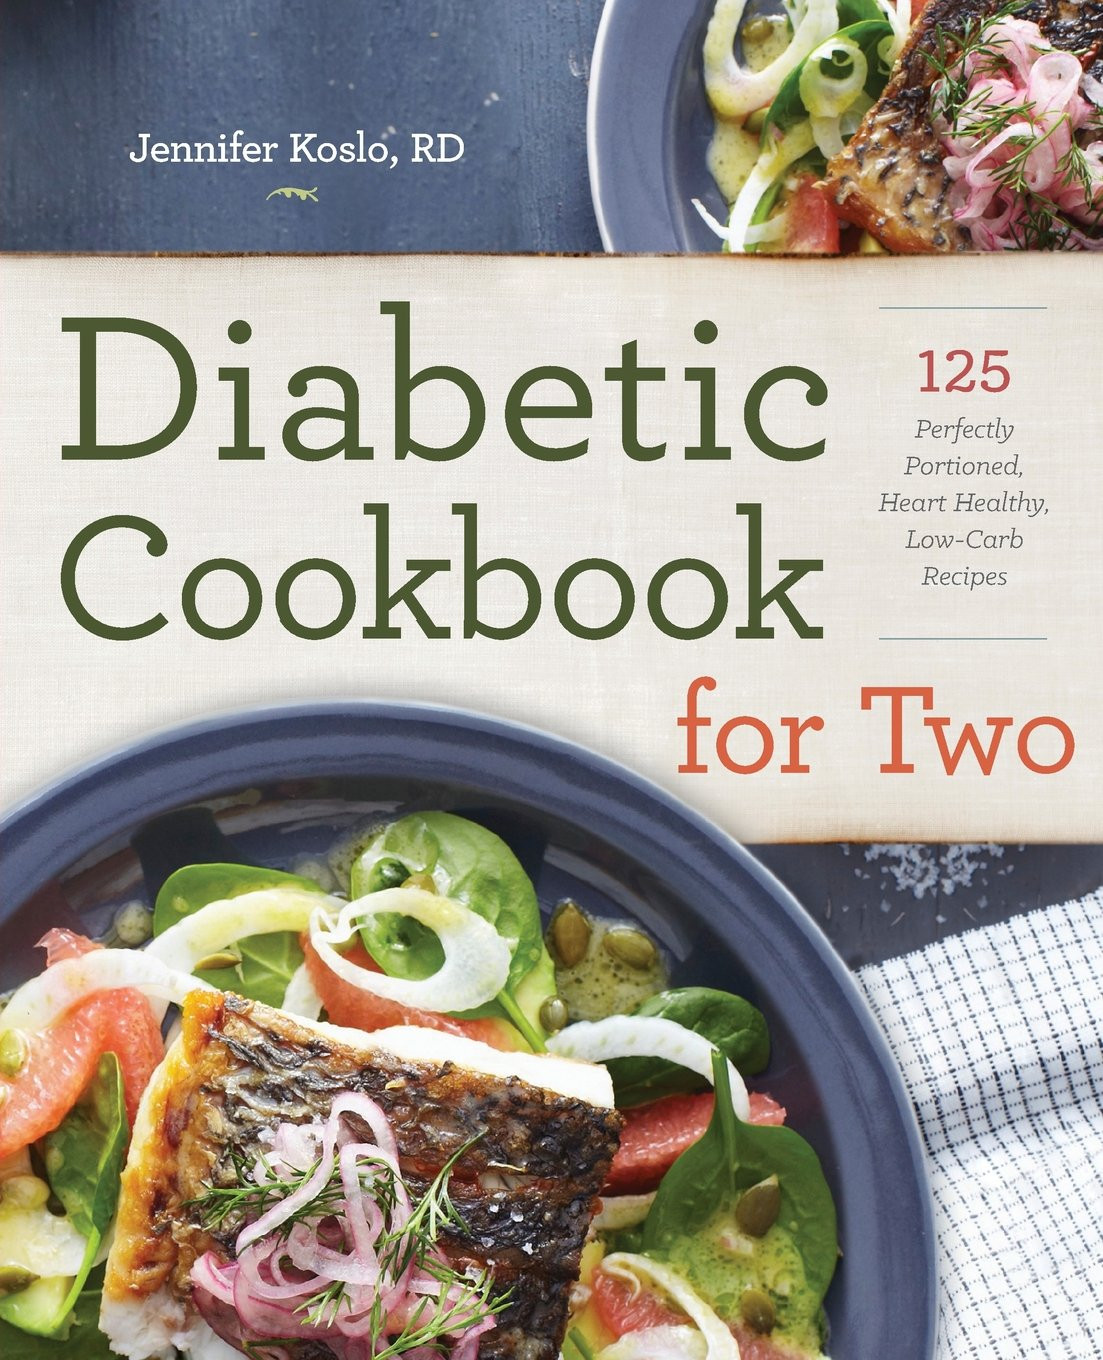 Heart Healthy And Diabetic Recipes
 Diabetic Cookbook for Two 125 Perfectly Portioned Heart